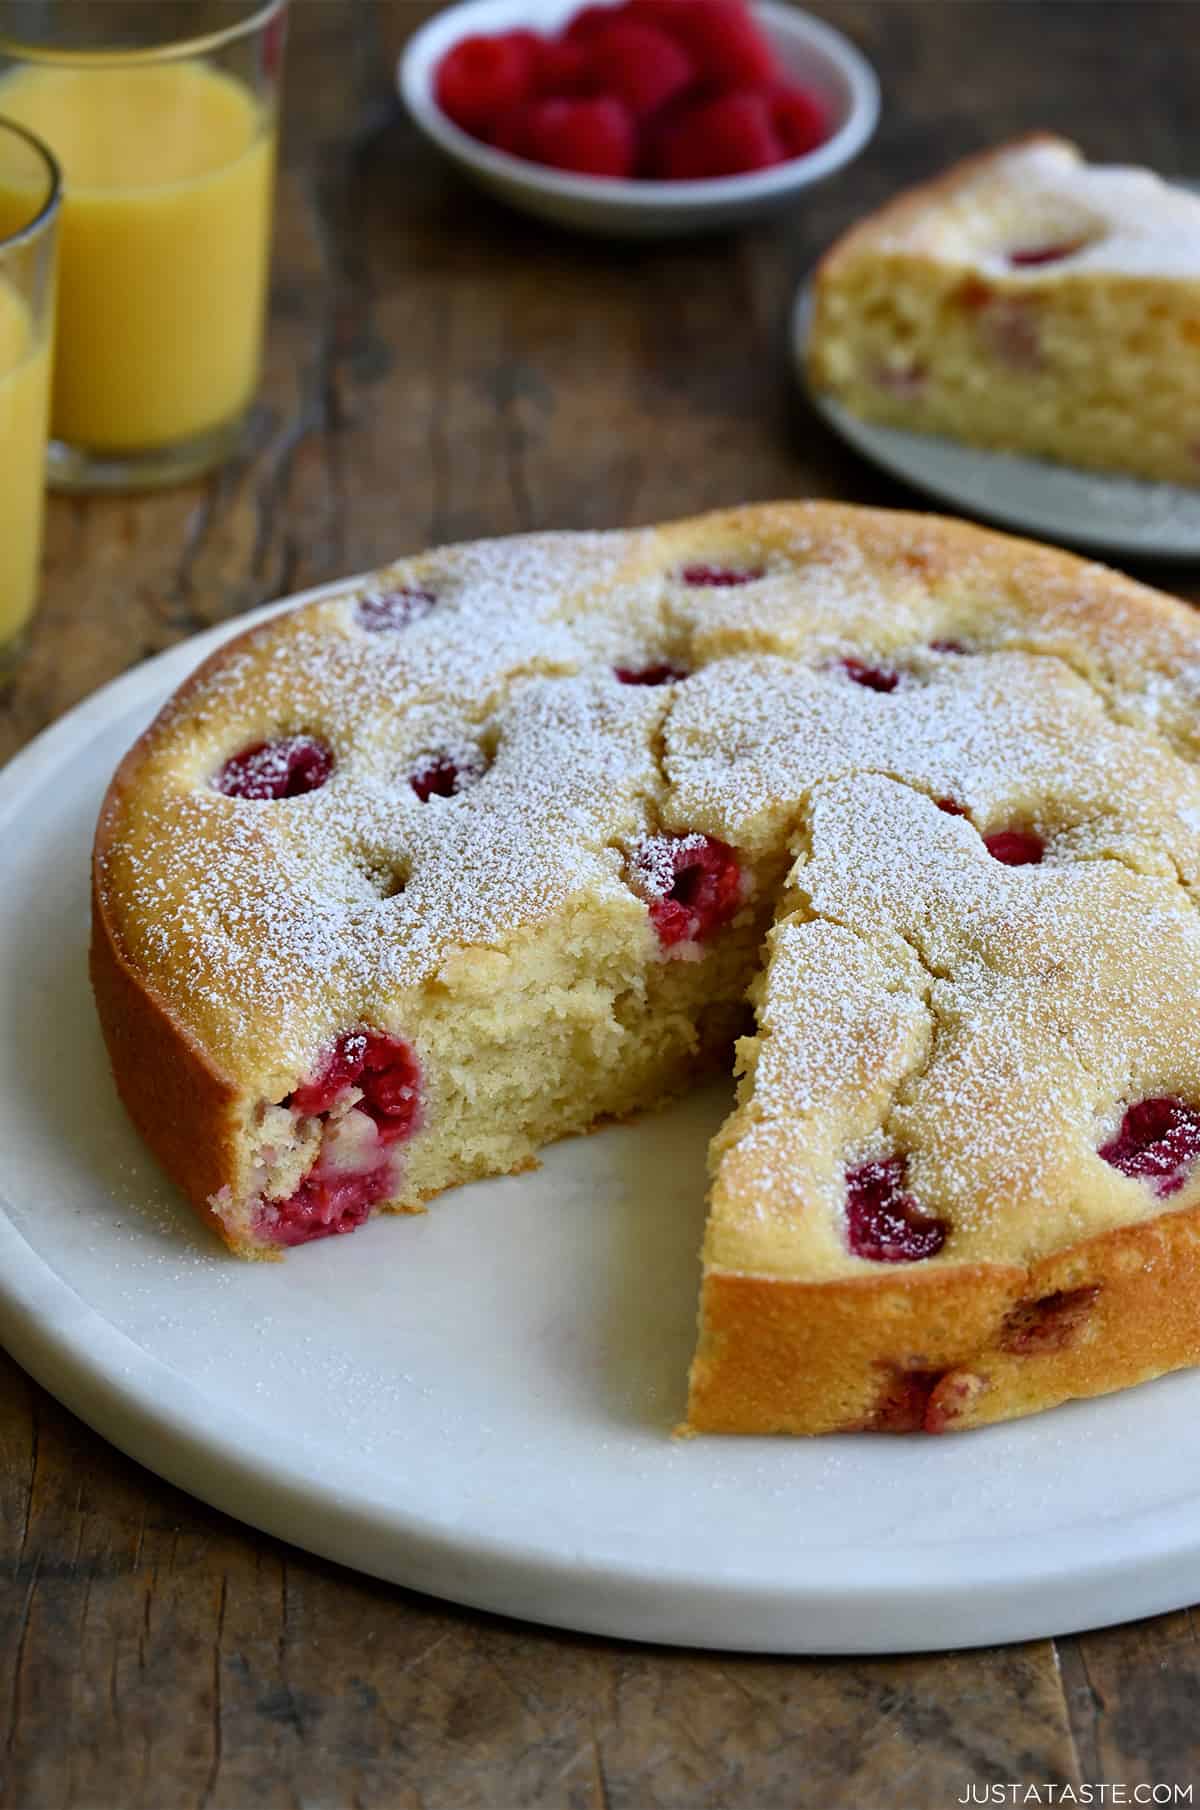 A thick coffee cake studded with raspberries with a slice missing on a round platter next to two glasses filled with orange juice.